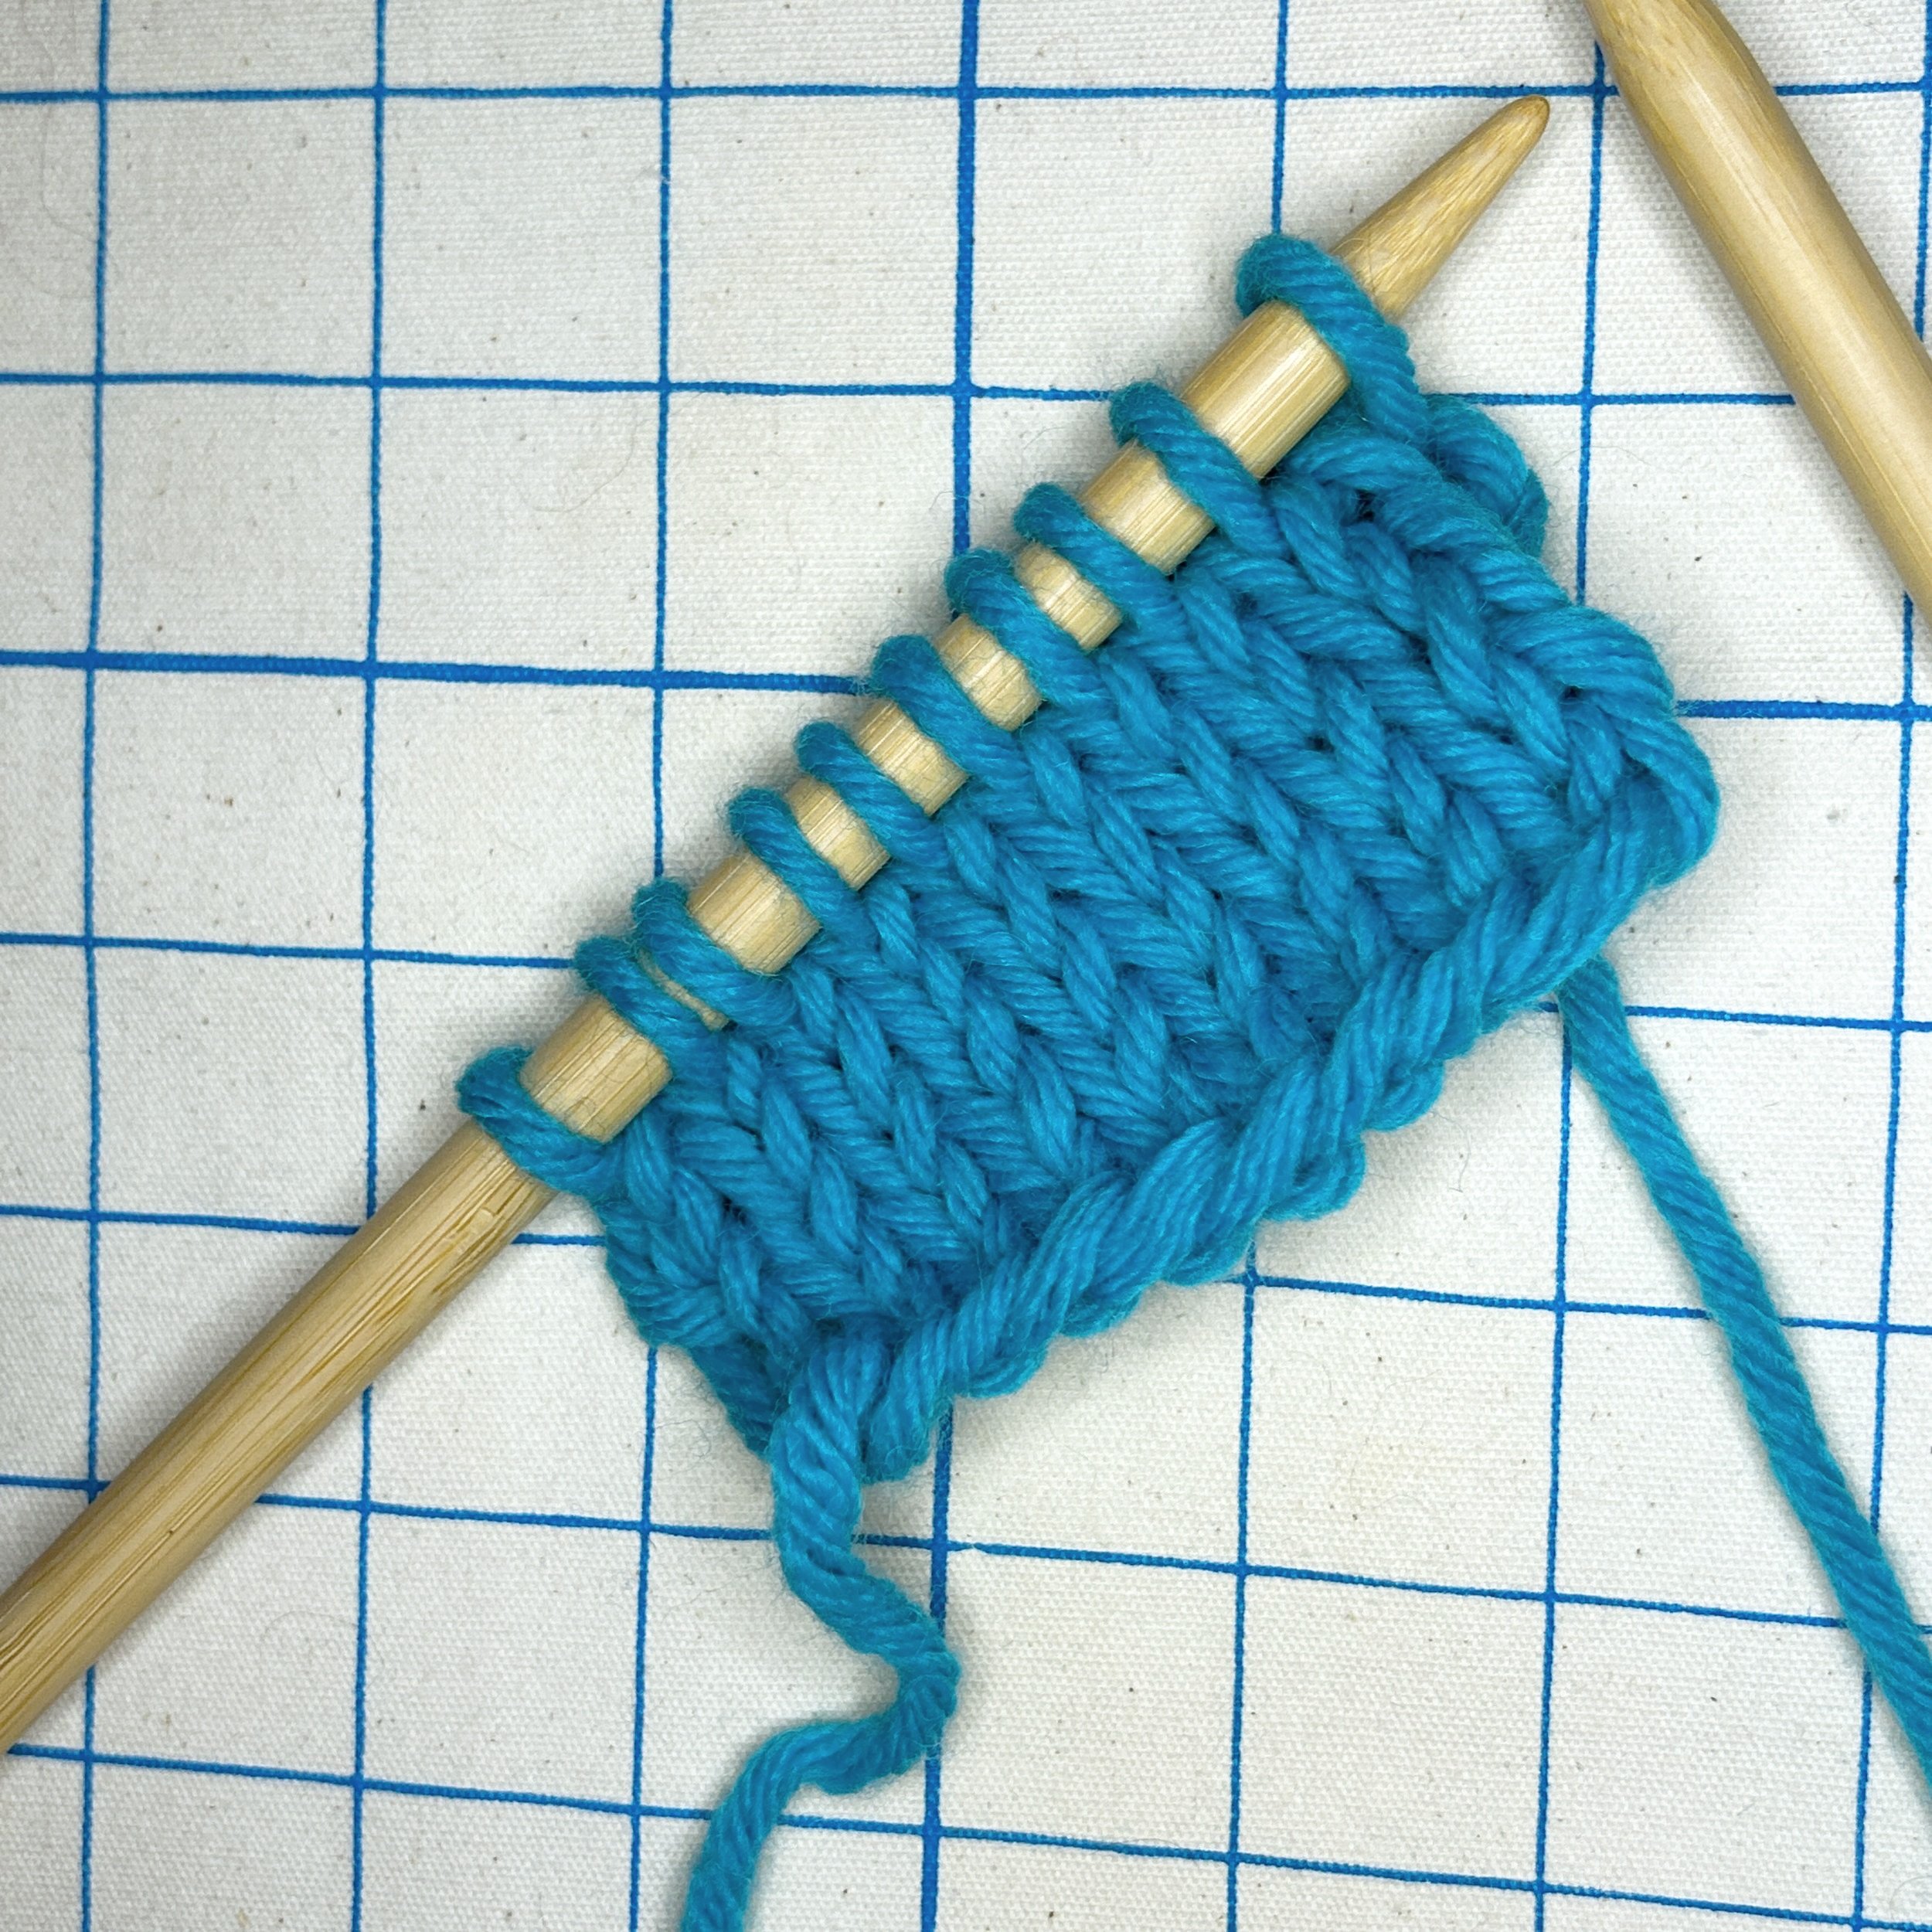 How to knit Stockinette Stitch in the round vs flat — knithow